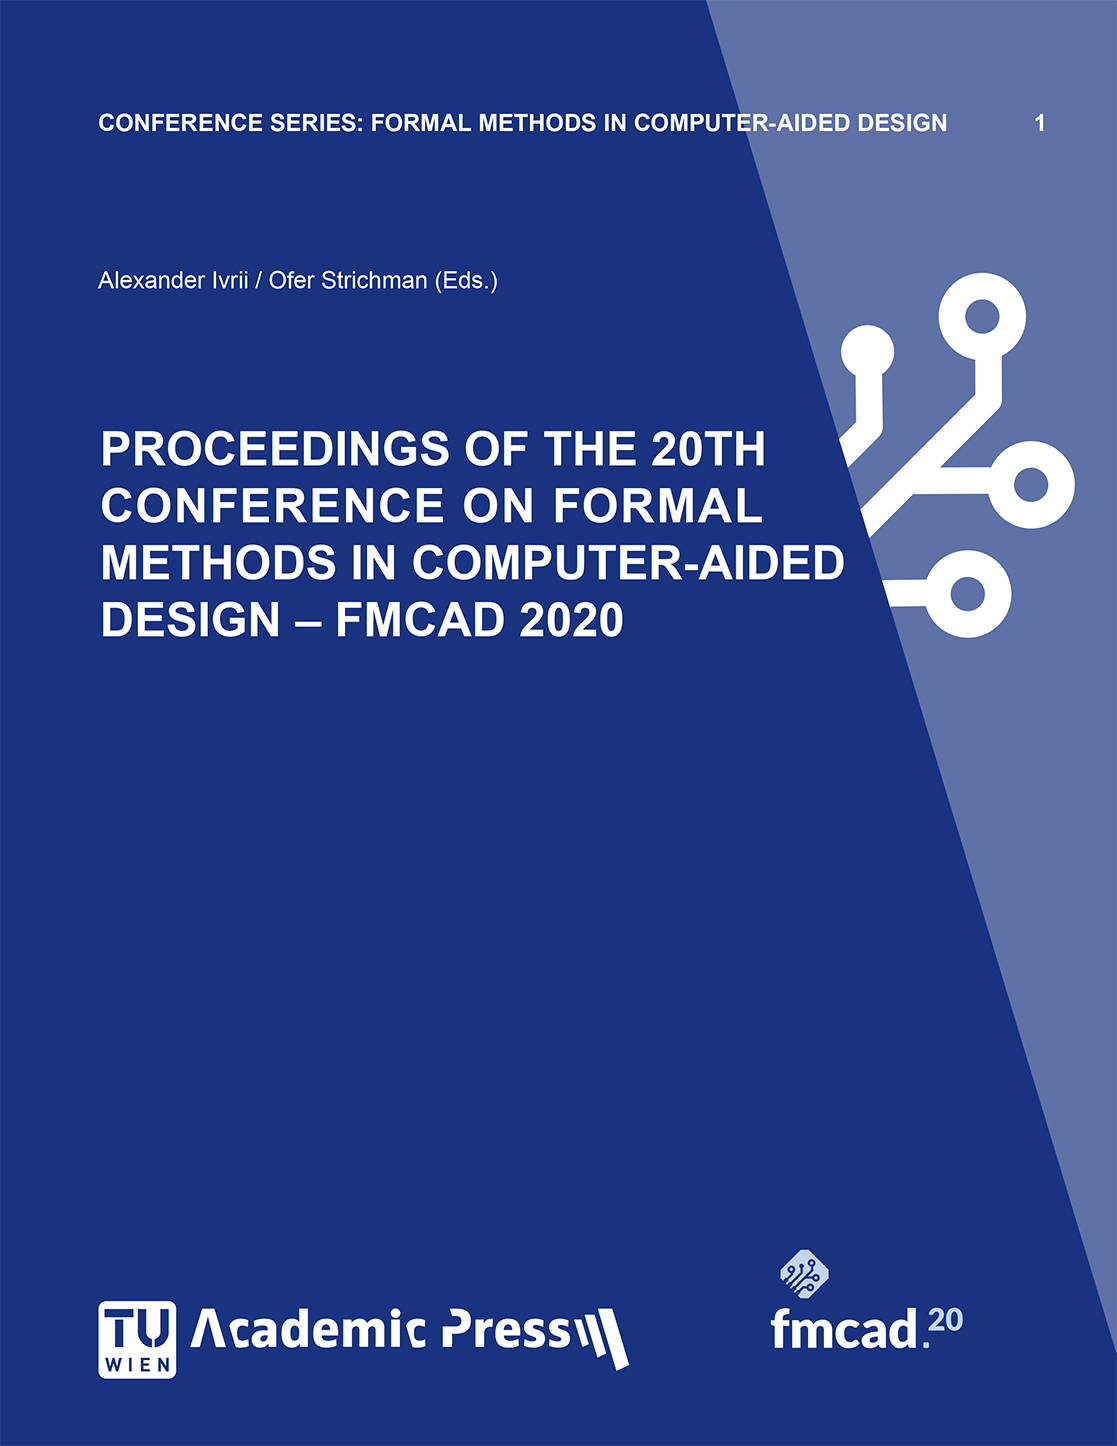 PROCEEDINGS OF THE 20TH CONFERENCE ON FORMAL METHODS IN COMPUTER-AIDED DESIGN – FMCAD 2020